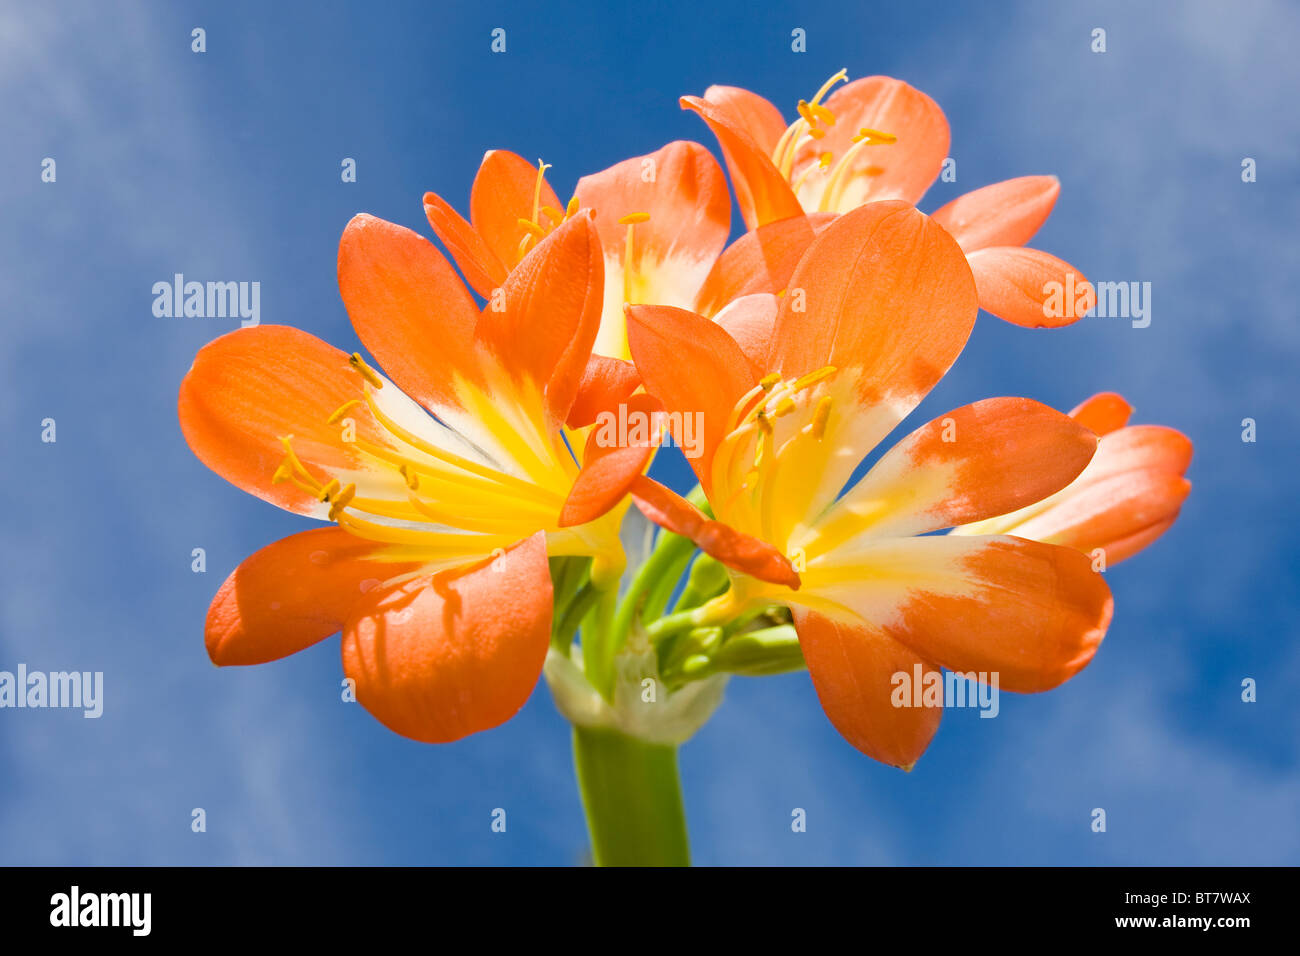 Clivia miniata in flower with a blue sky Stock Photo